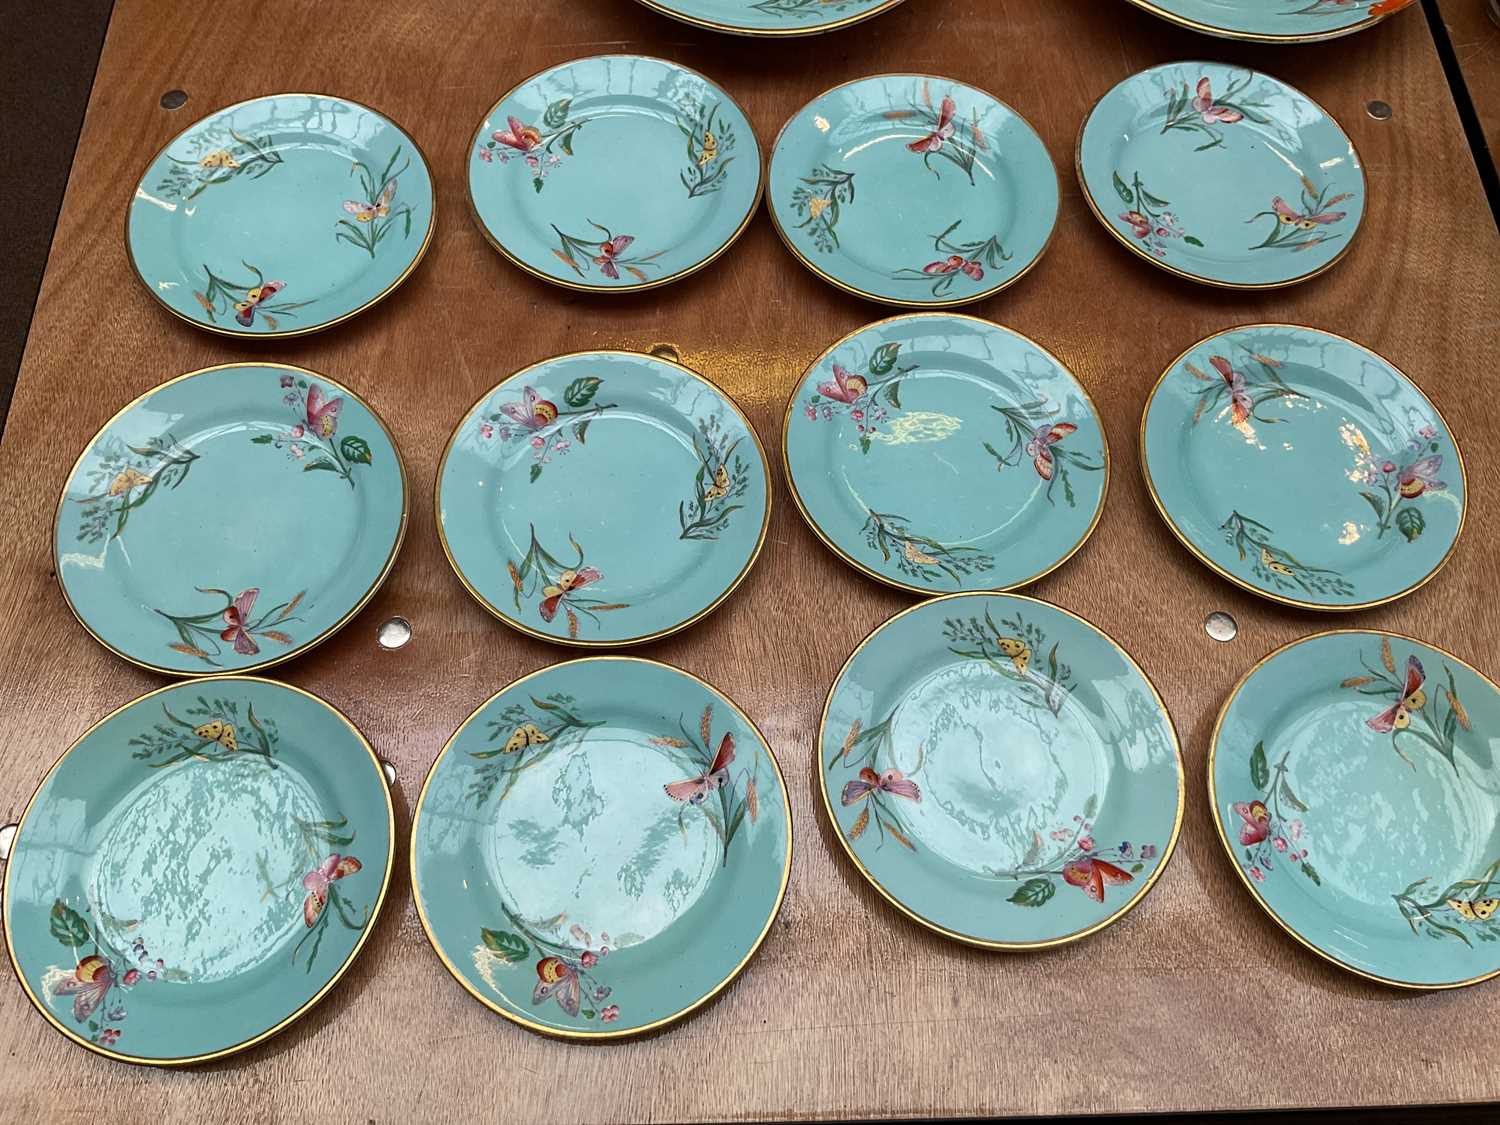 A 19th century English bone china thirty-eight piece part tea service, decorated with butterflies - Image 8 of 9